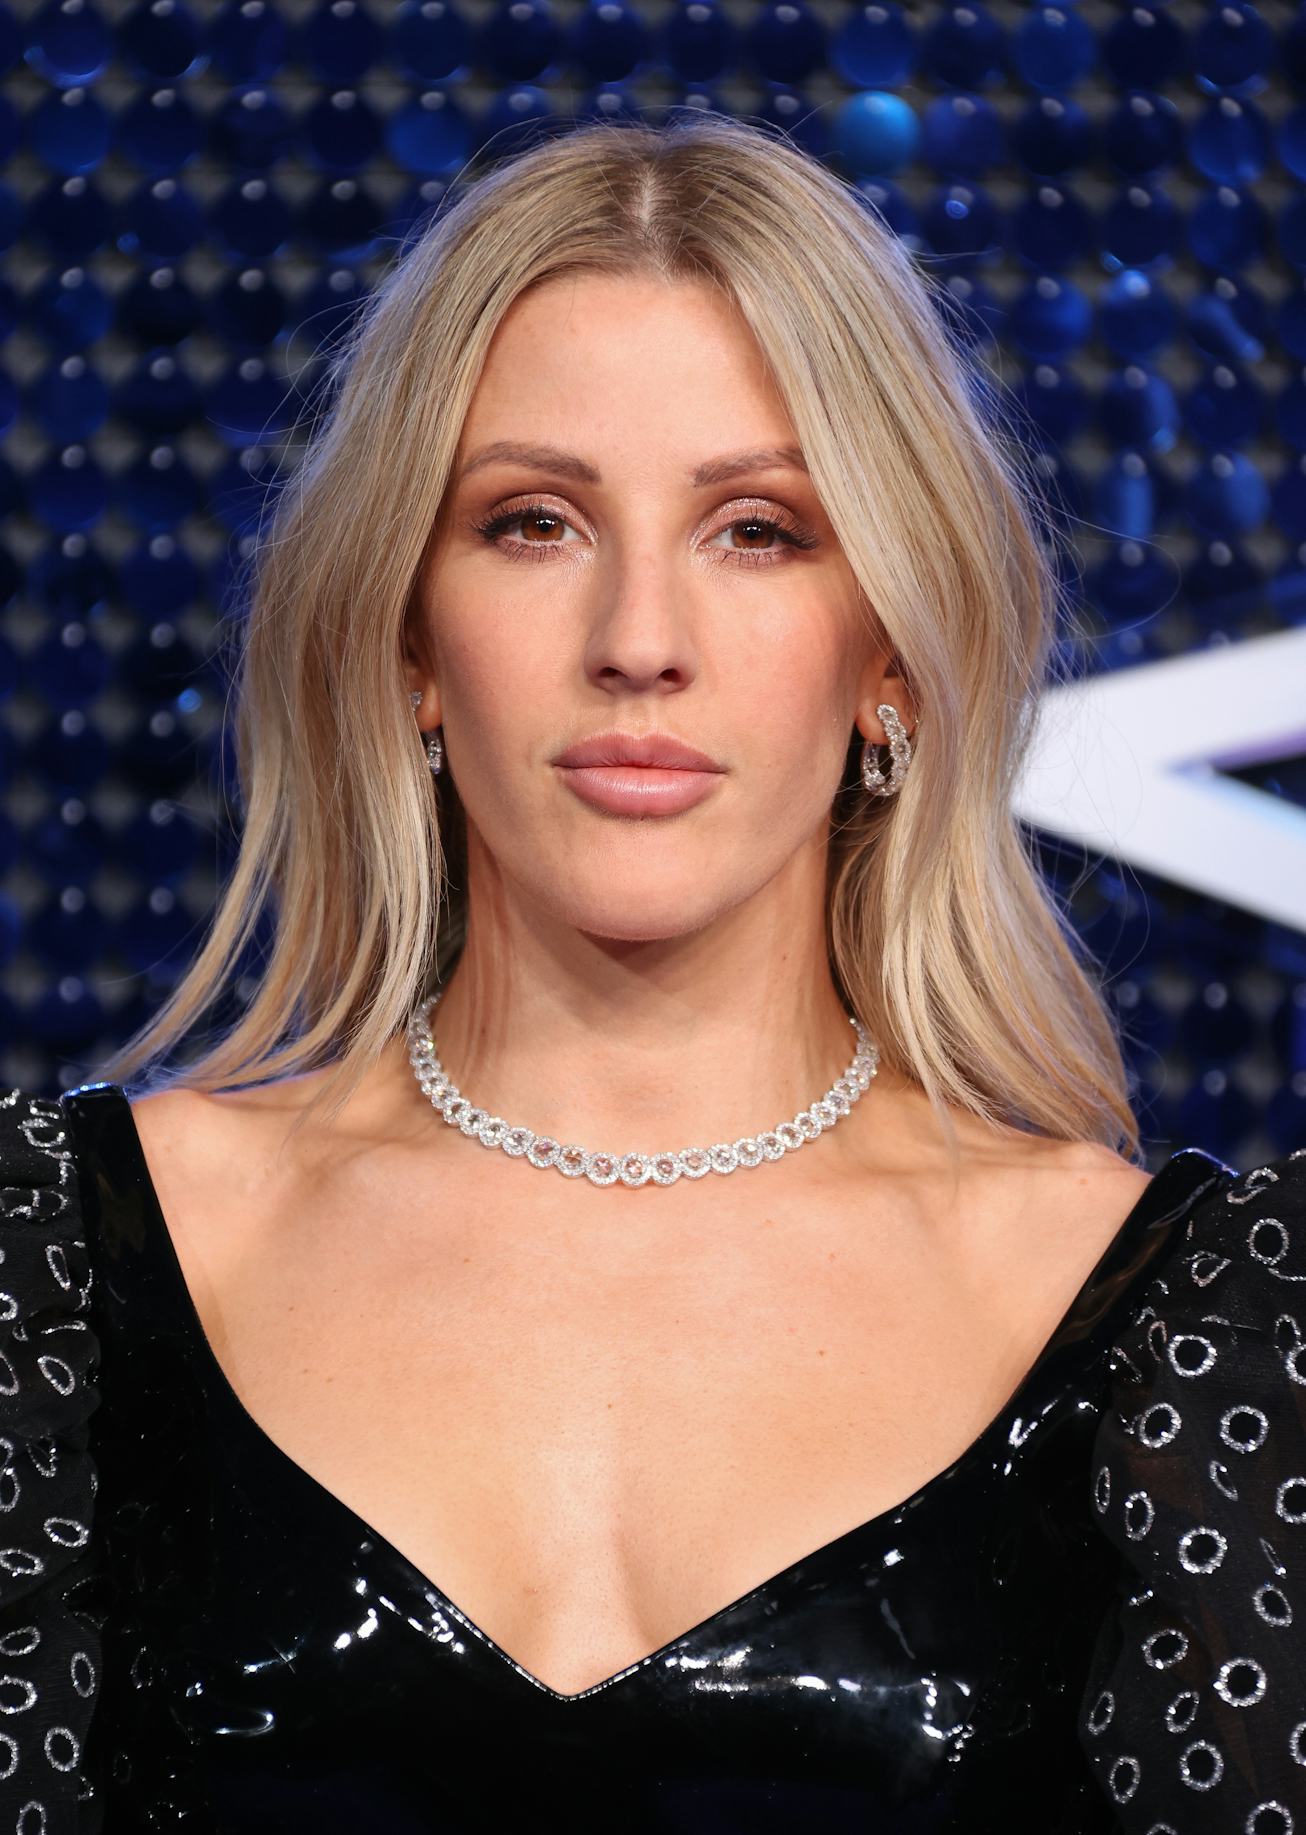 Ellie Goulding attends The Global Awards 2020 at Eventim Apollo, Hammersmith on March 05, 2020 in Lo...